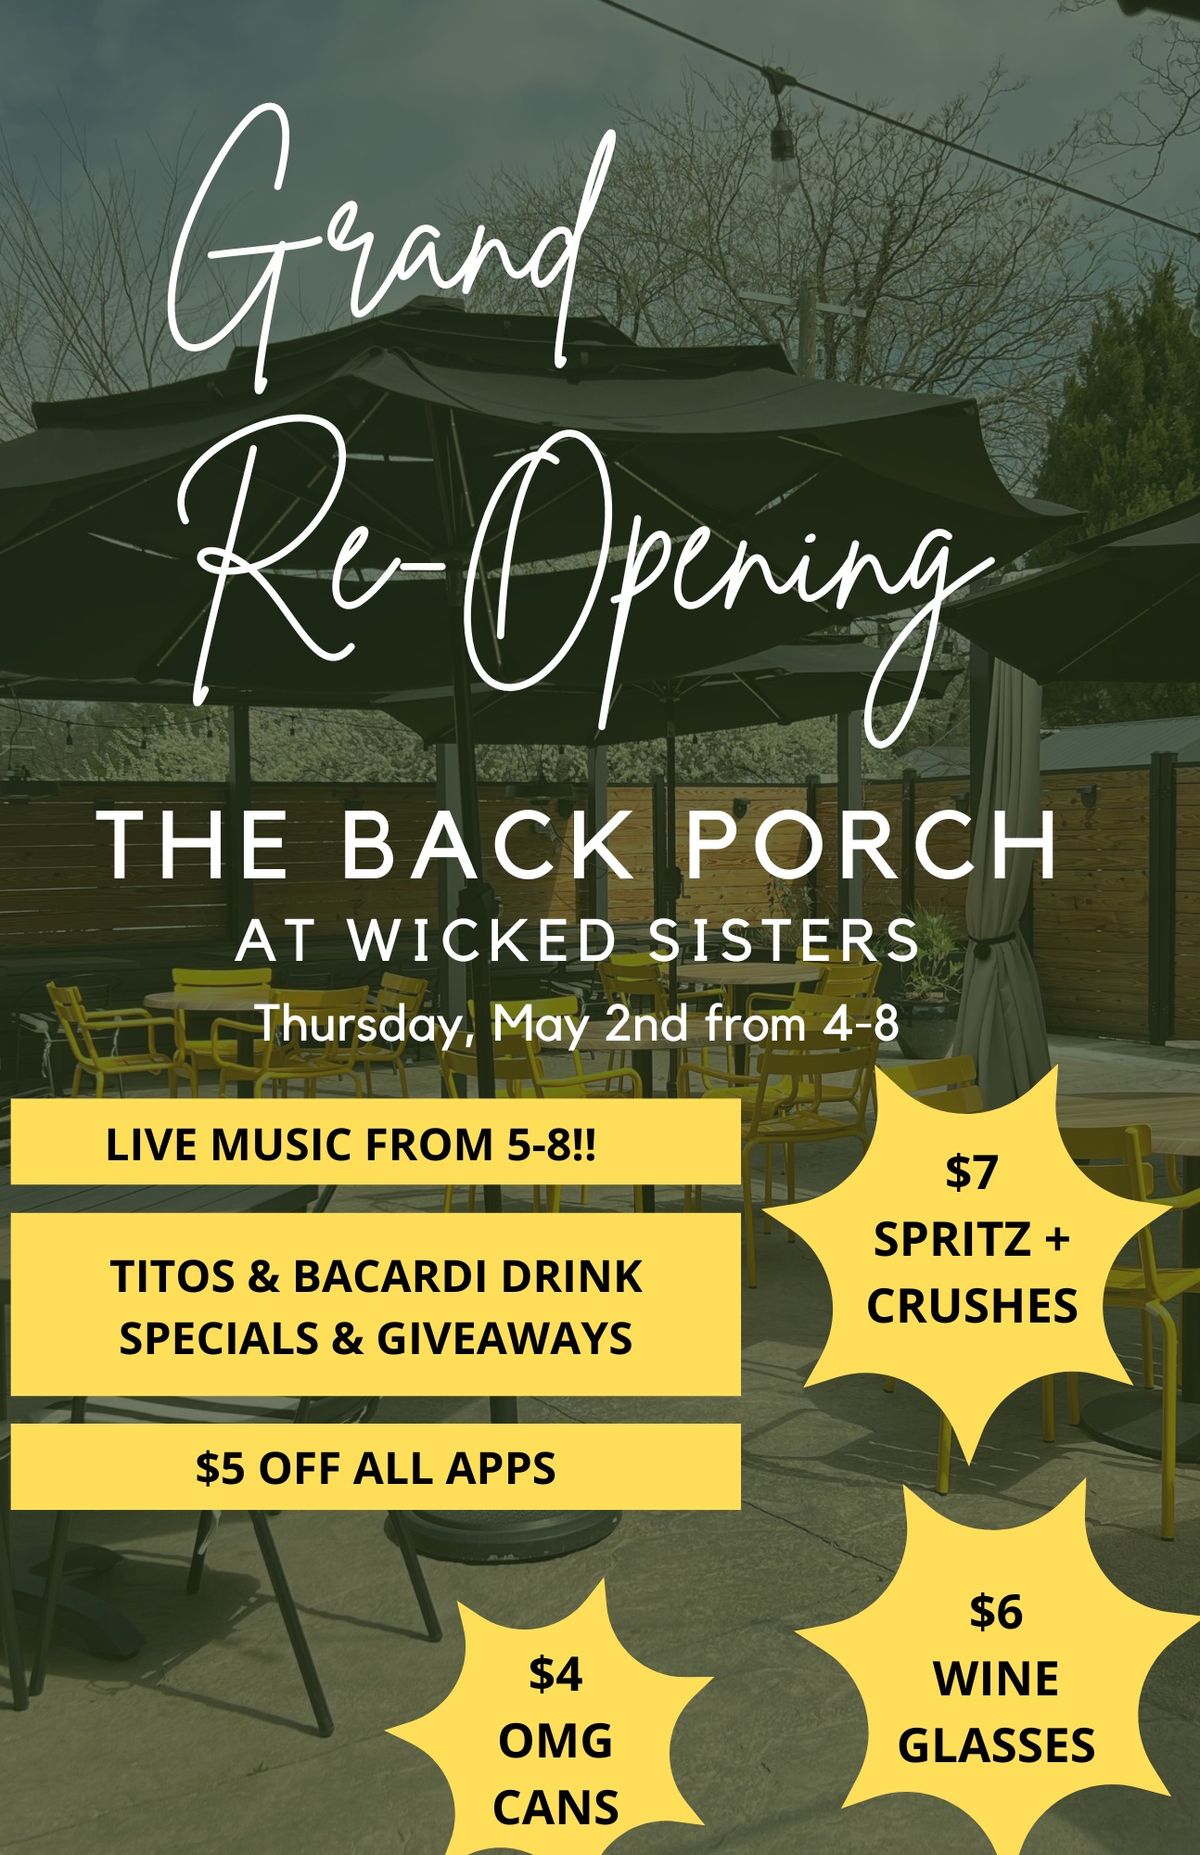 Grand Re-Opening of The Back Porch @ Wicked Sisters